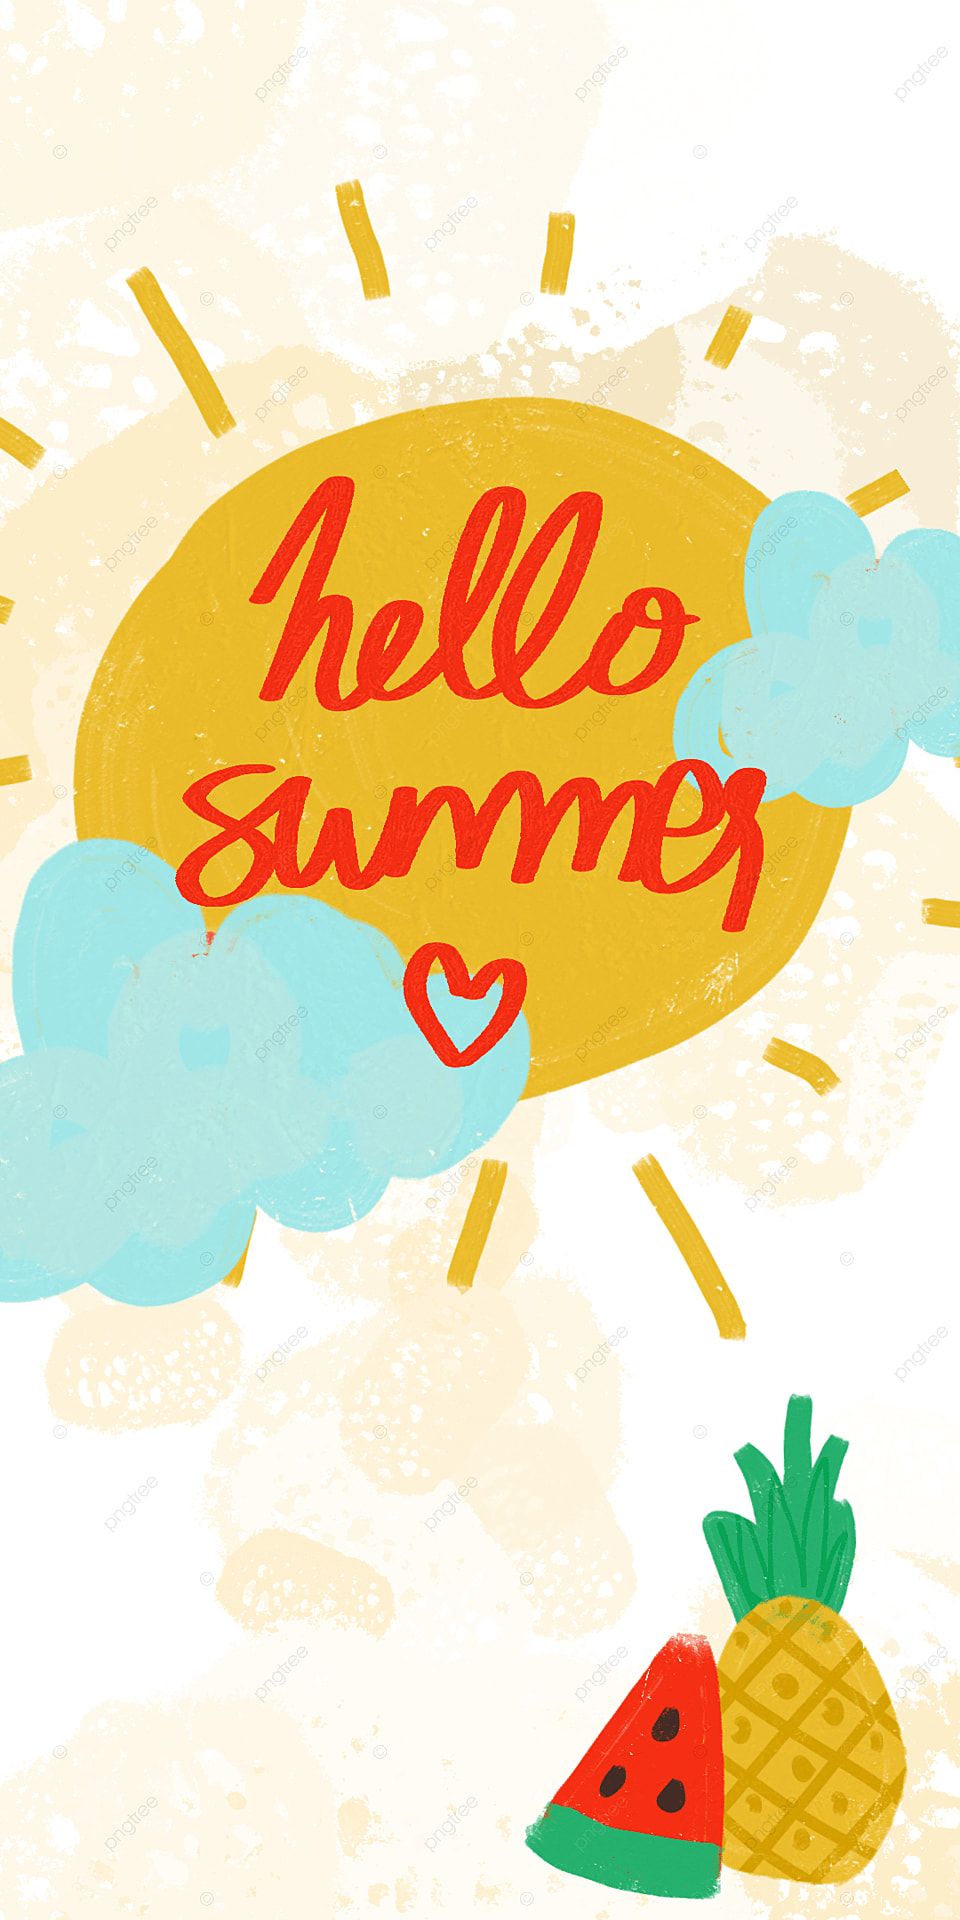 Hello Summer Wallpaper Background Cheerful With Watermelon And Pineapple, Hello Summer, Summer, Happy Summer Background Image for Free Download